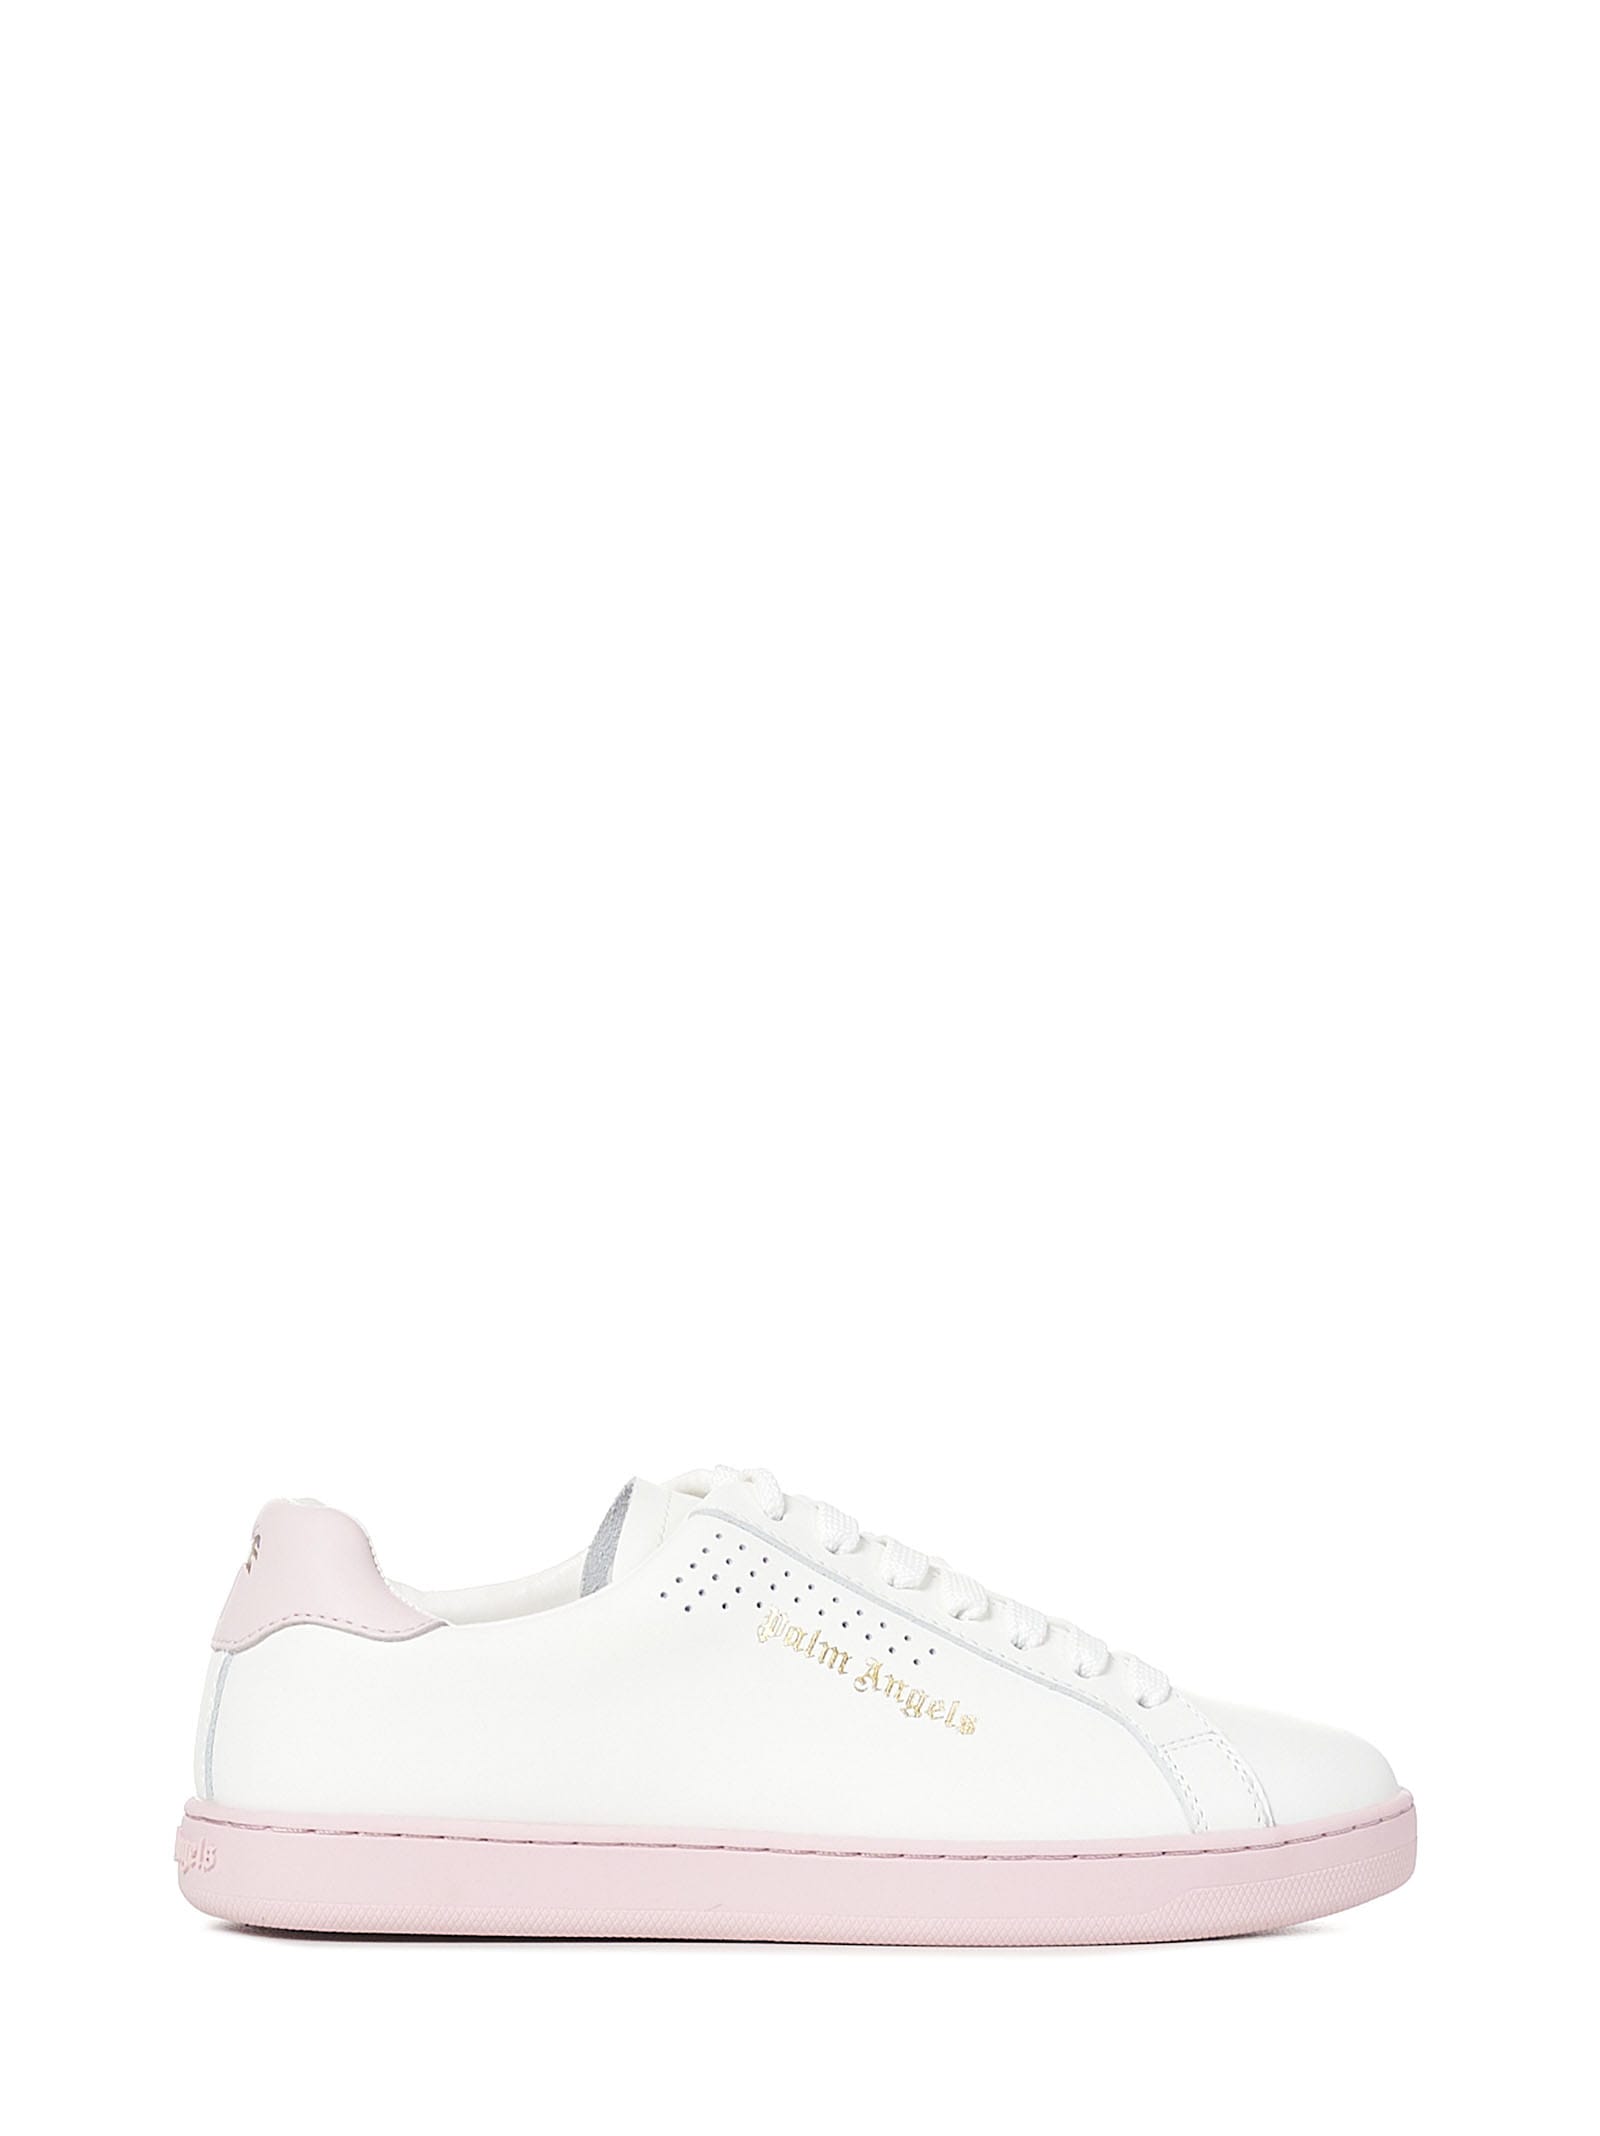 Palm Angels Sneakers